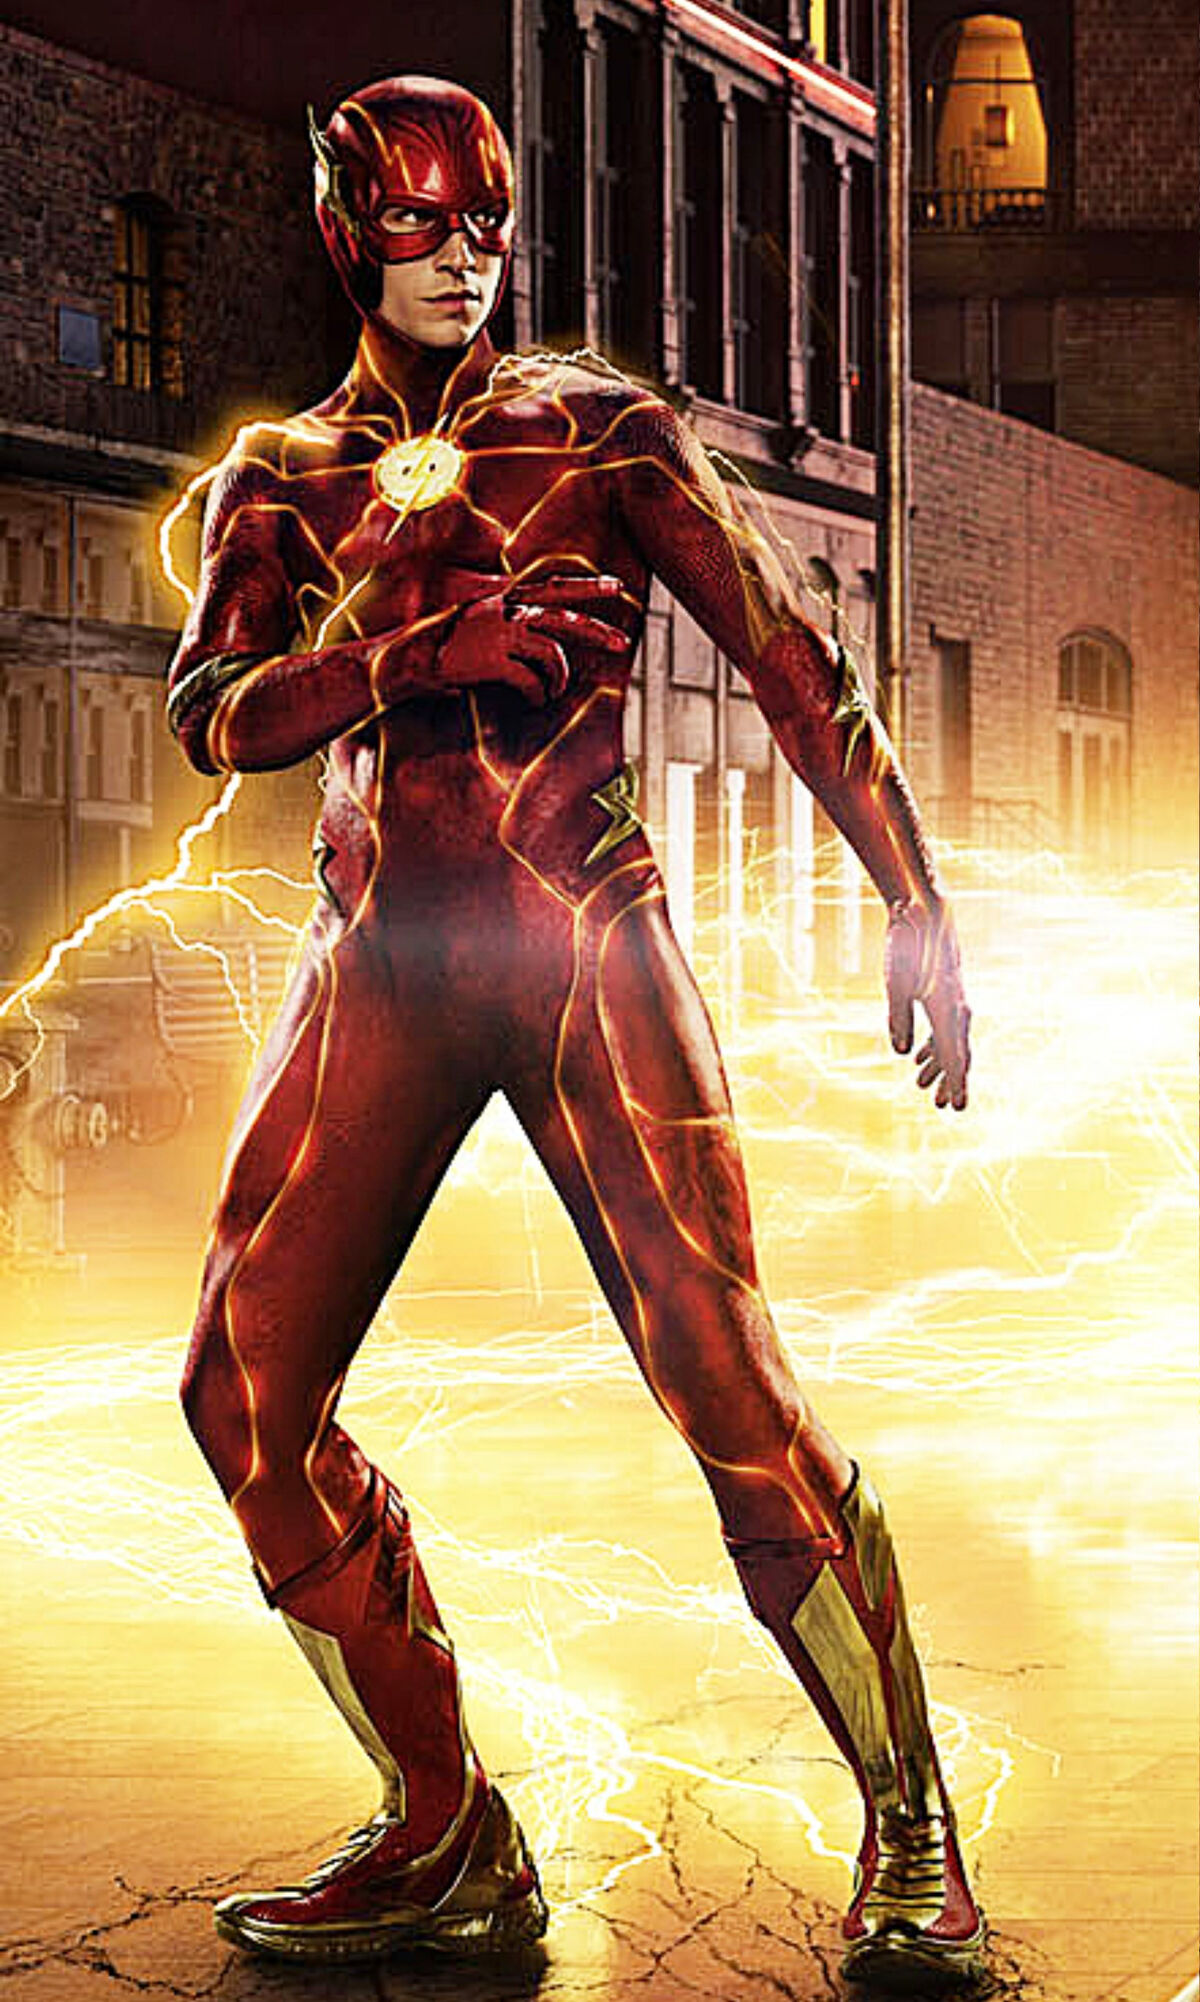 The 1st official look of Dark Flash in The Flash 2023 film. : r